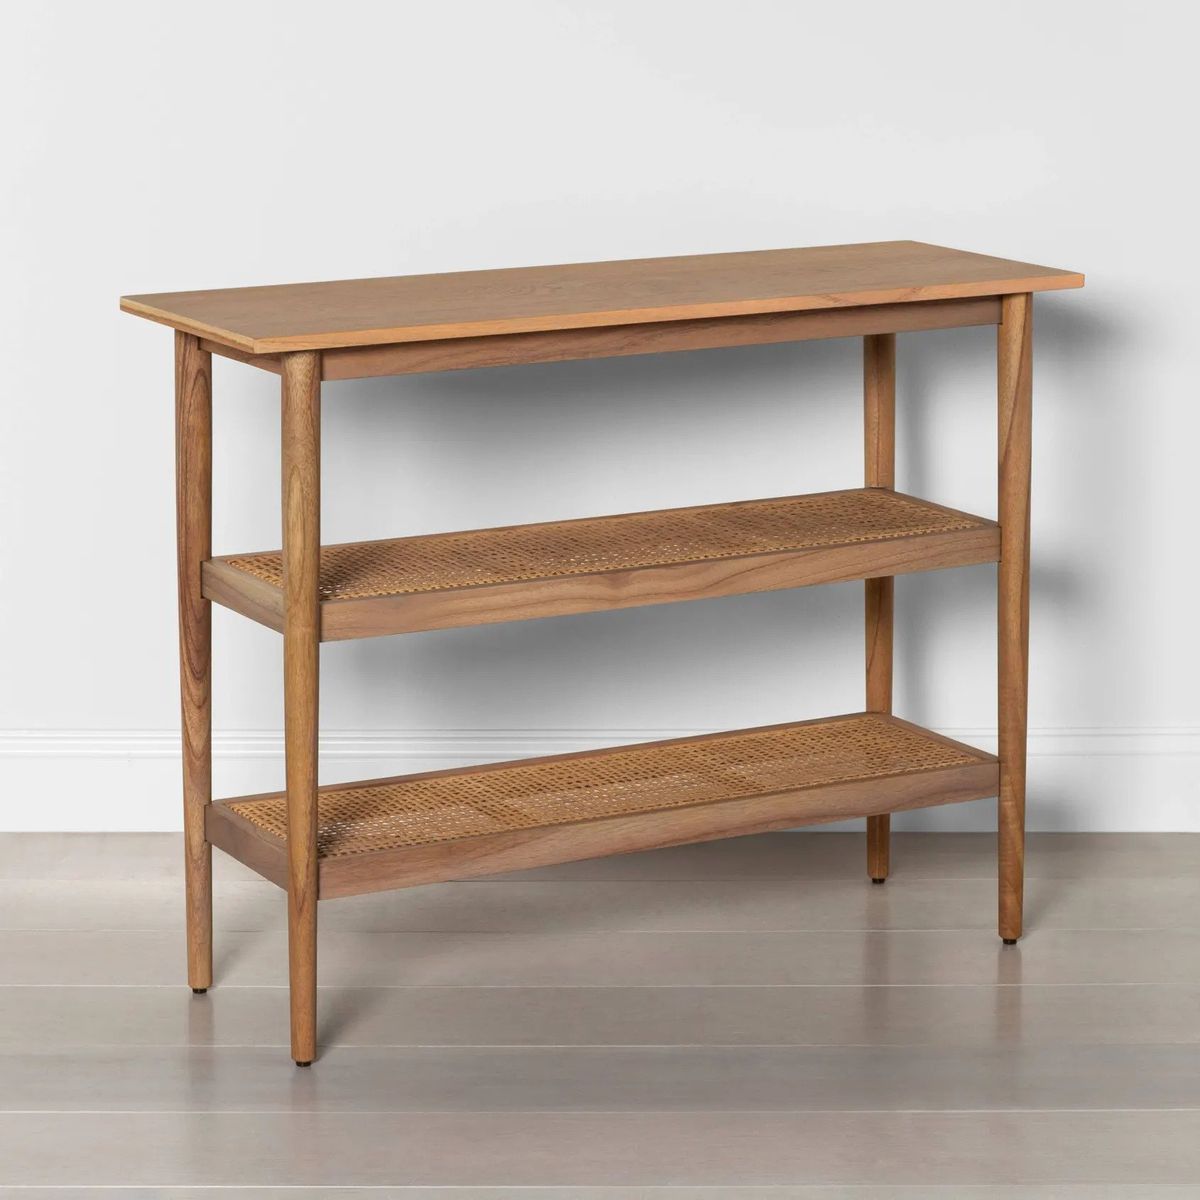 Tiered timber console table.